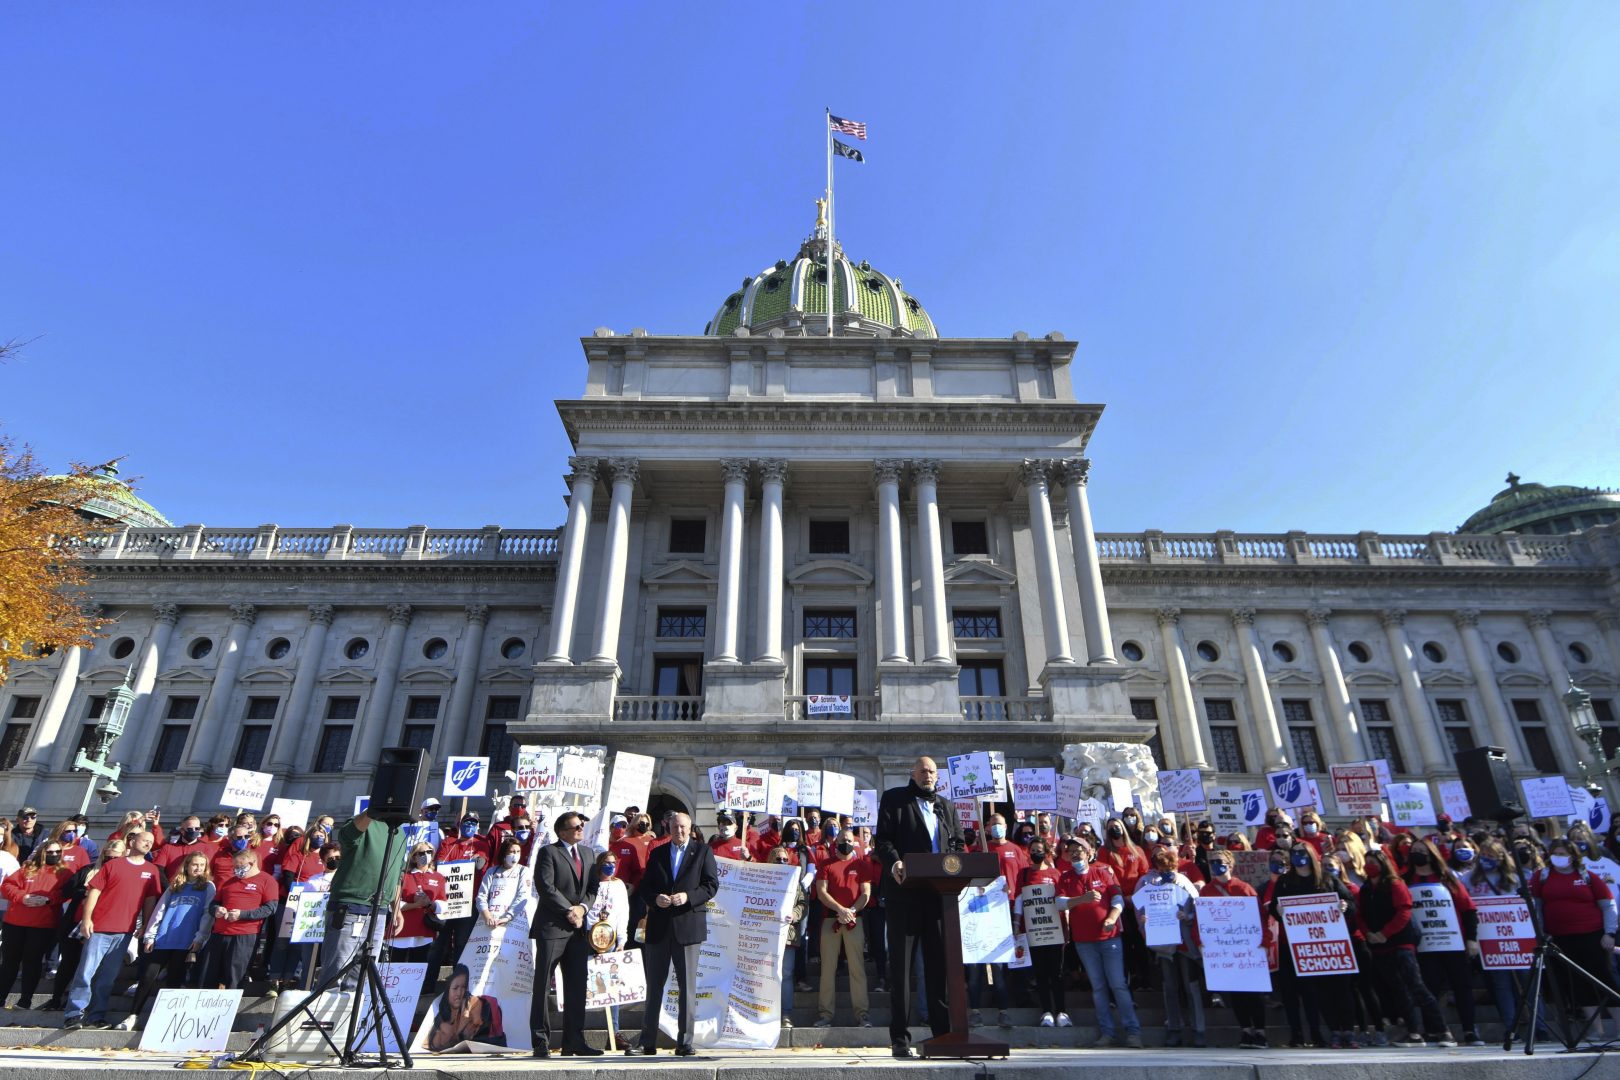 Lt. Gov. John Fetterman speaks at a rally of the striking Scranton Federation of Teachers at the Pennsylvania Capitol, Wednesday, Nov. 10, 2021, in Harrisburg, Pa. Fetterman was joined by labor leaders and other Democratic office holders at the rally. (AP Photo/Marc Levy)